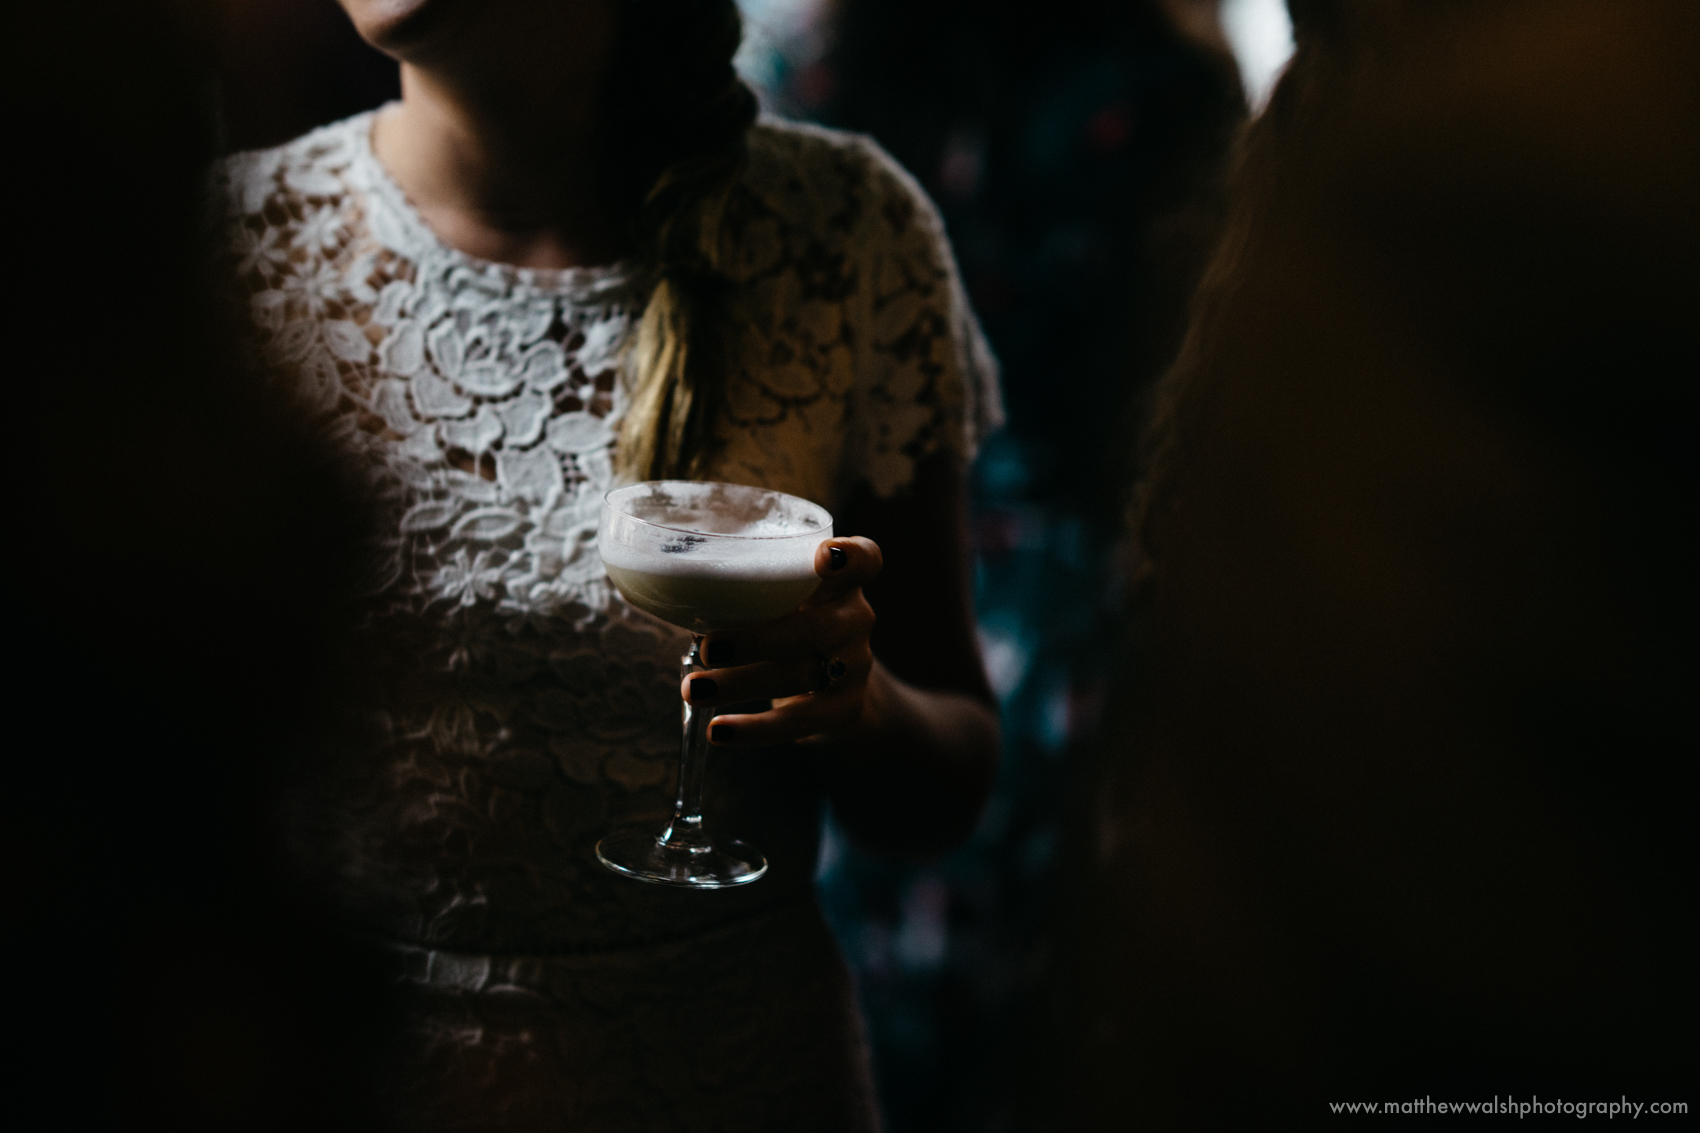 A slither of light catches the brides drink and dress, not a moment to be missed